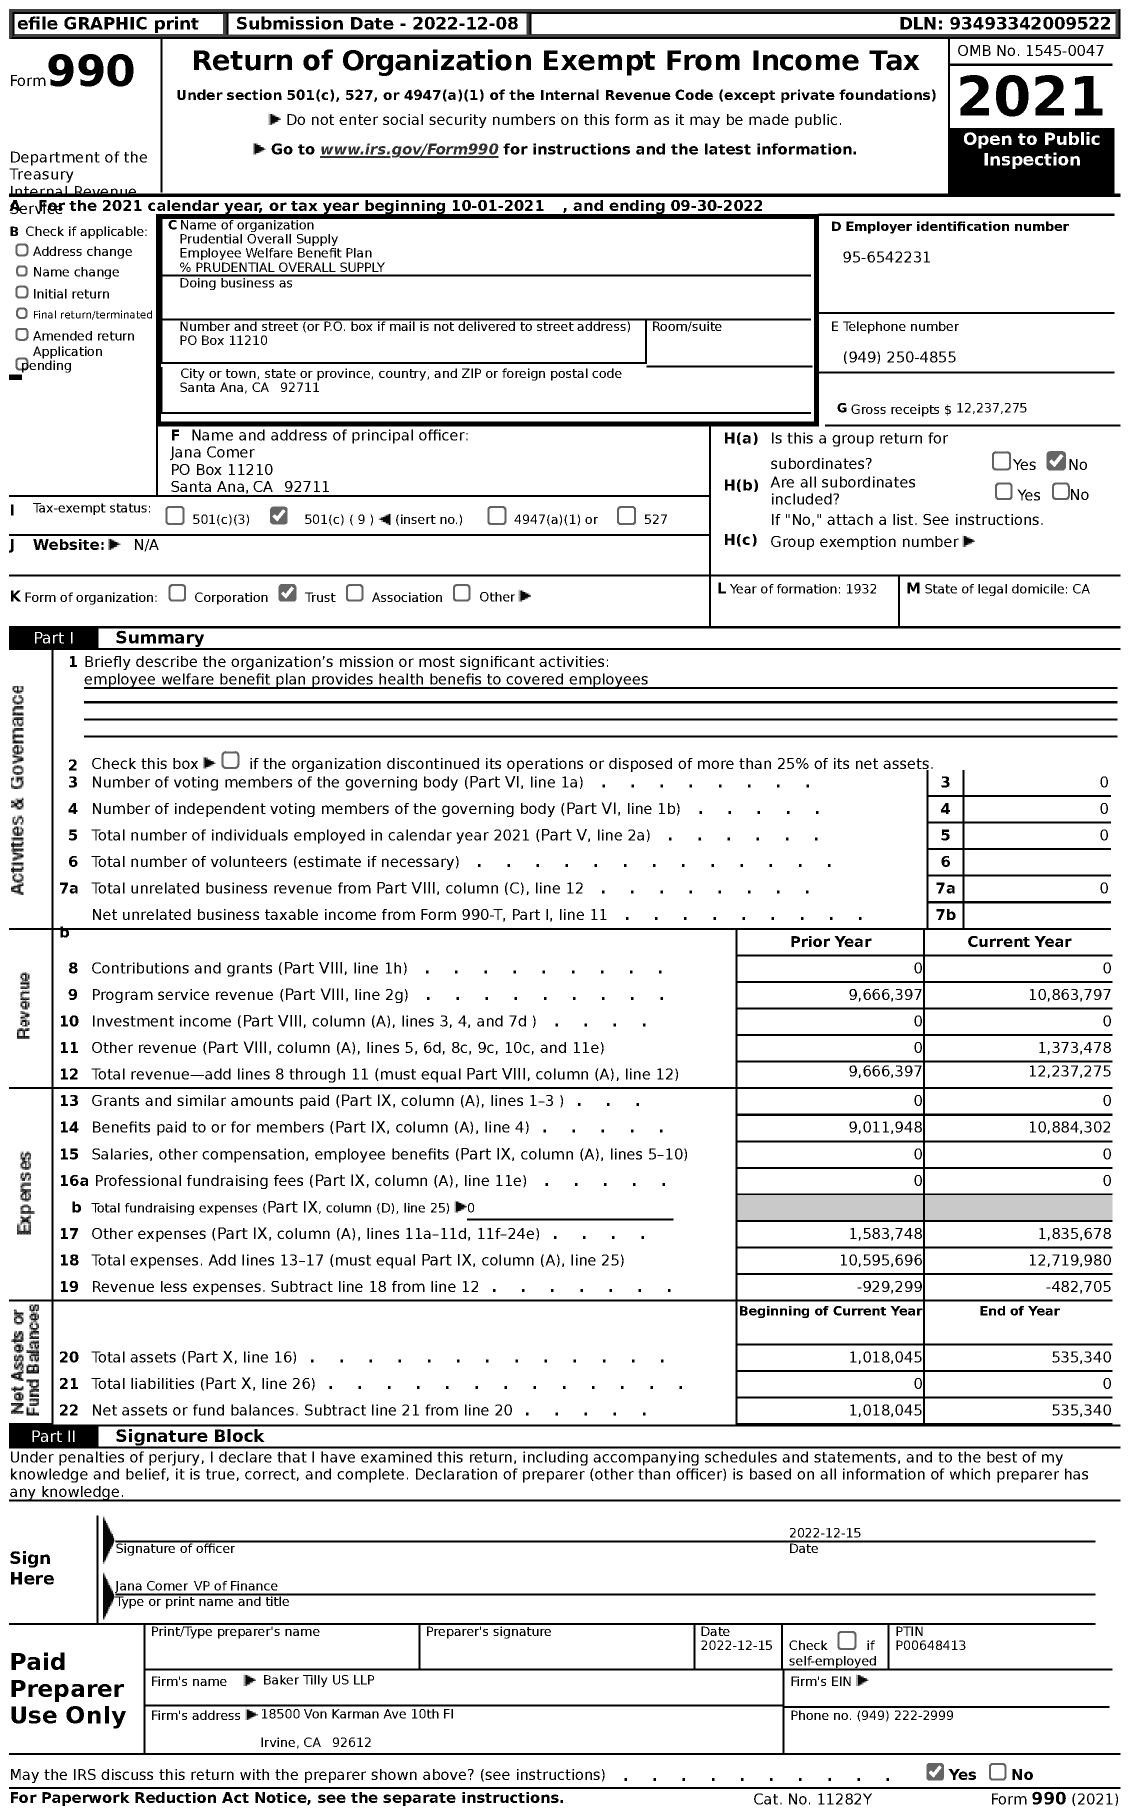 Image of first page of 2021 Form 990 for Prudential Overall Supply Employee Welfare Benefit Plan